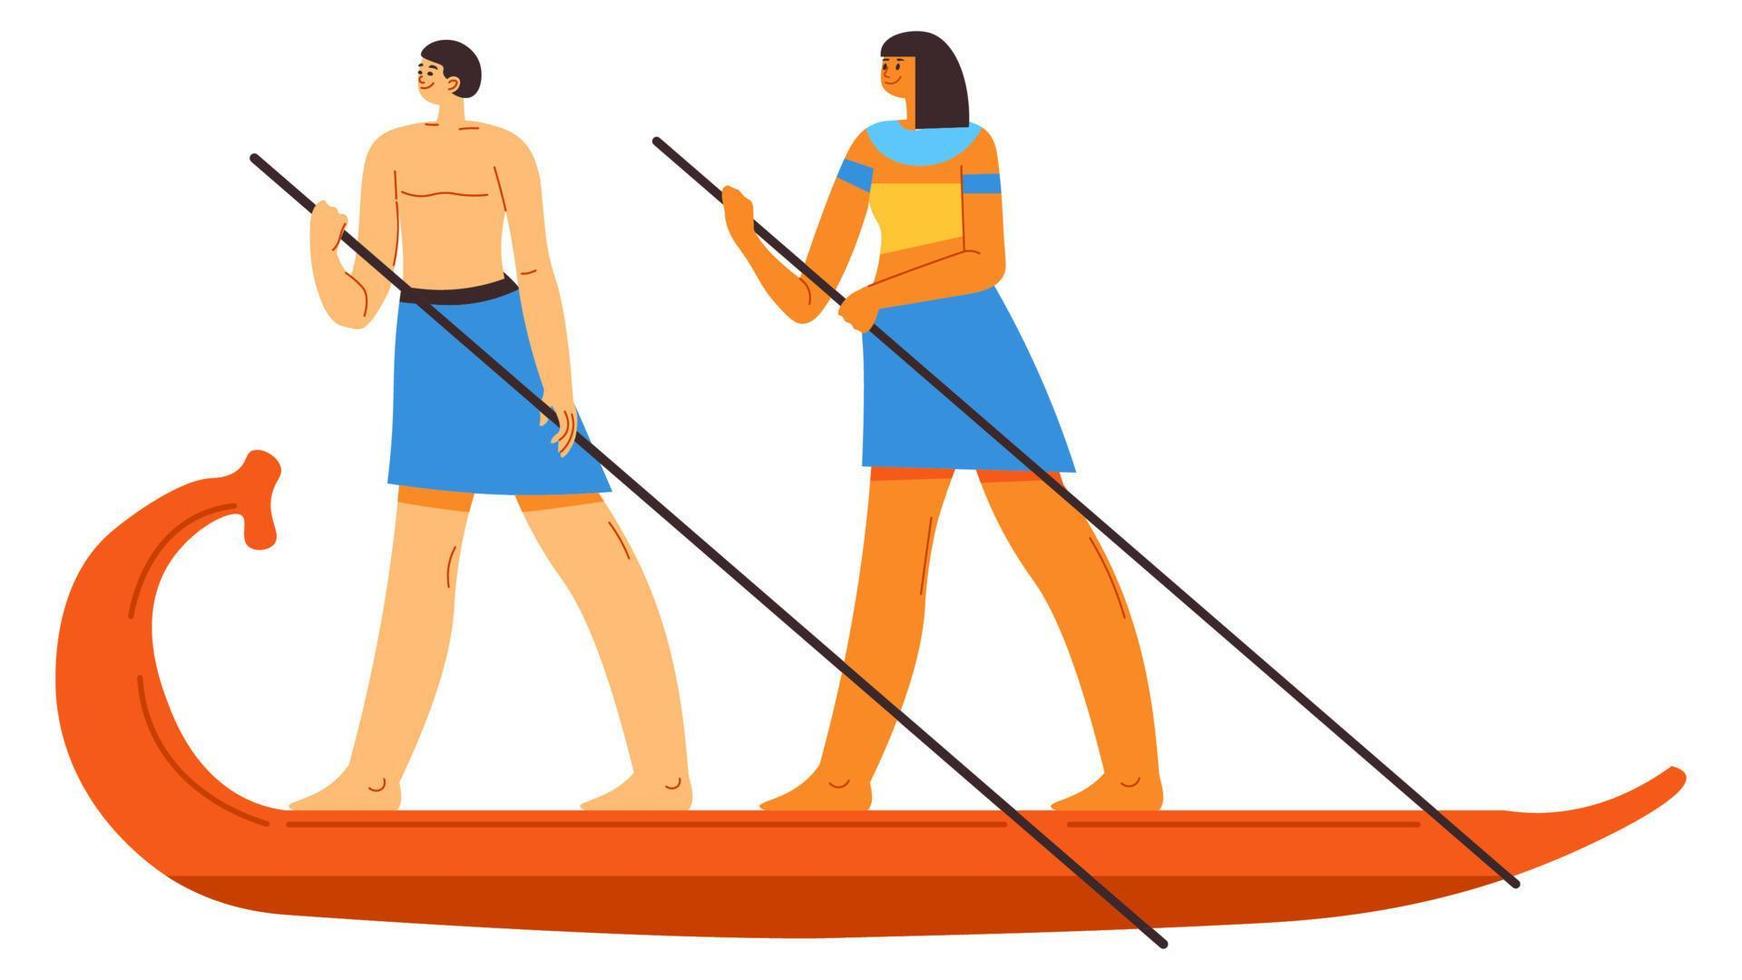 Ancient egyptian people floating on wooden boat vector